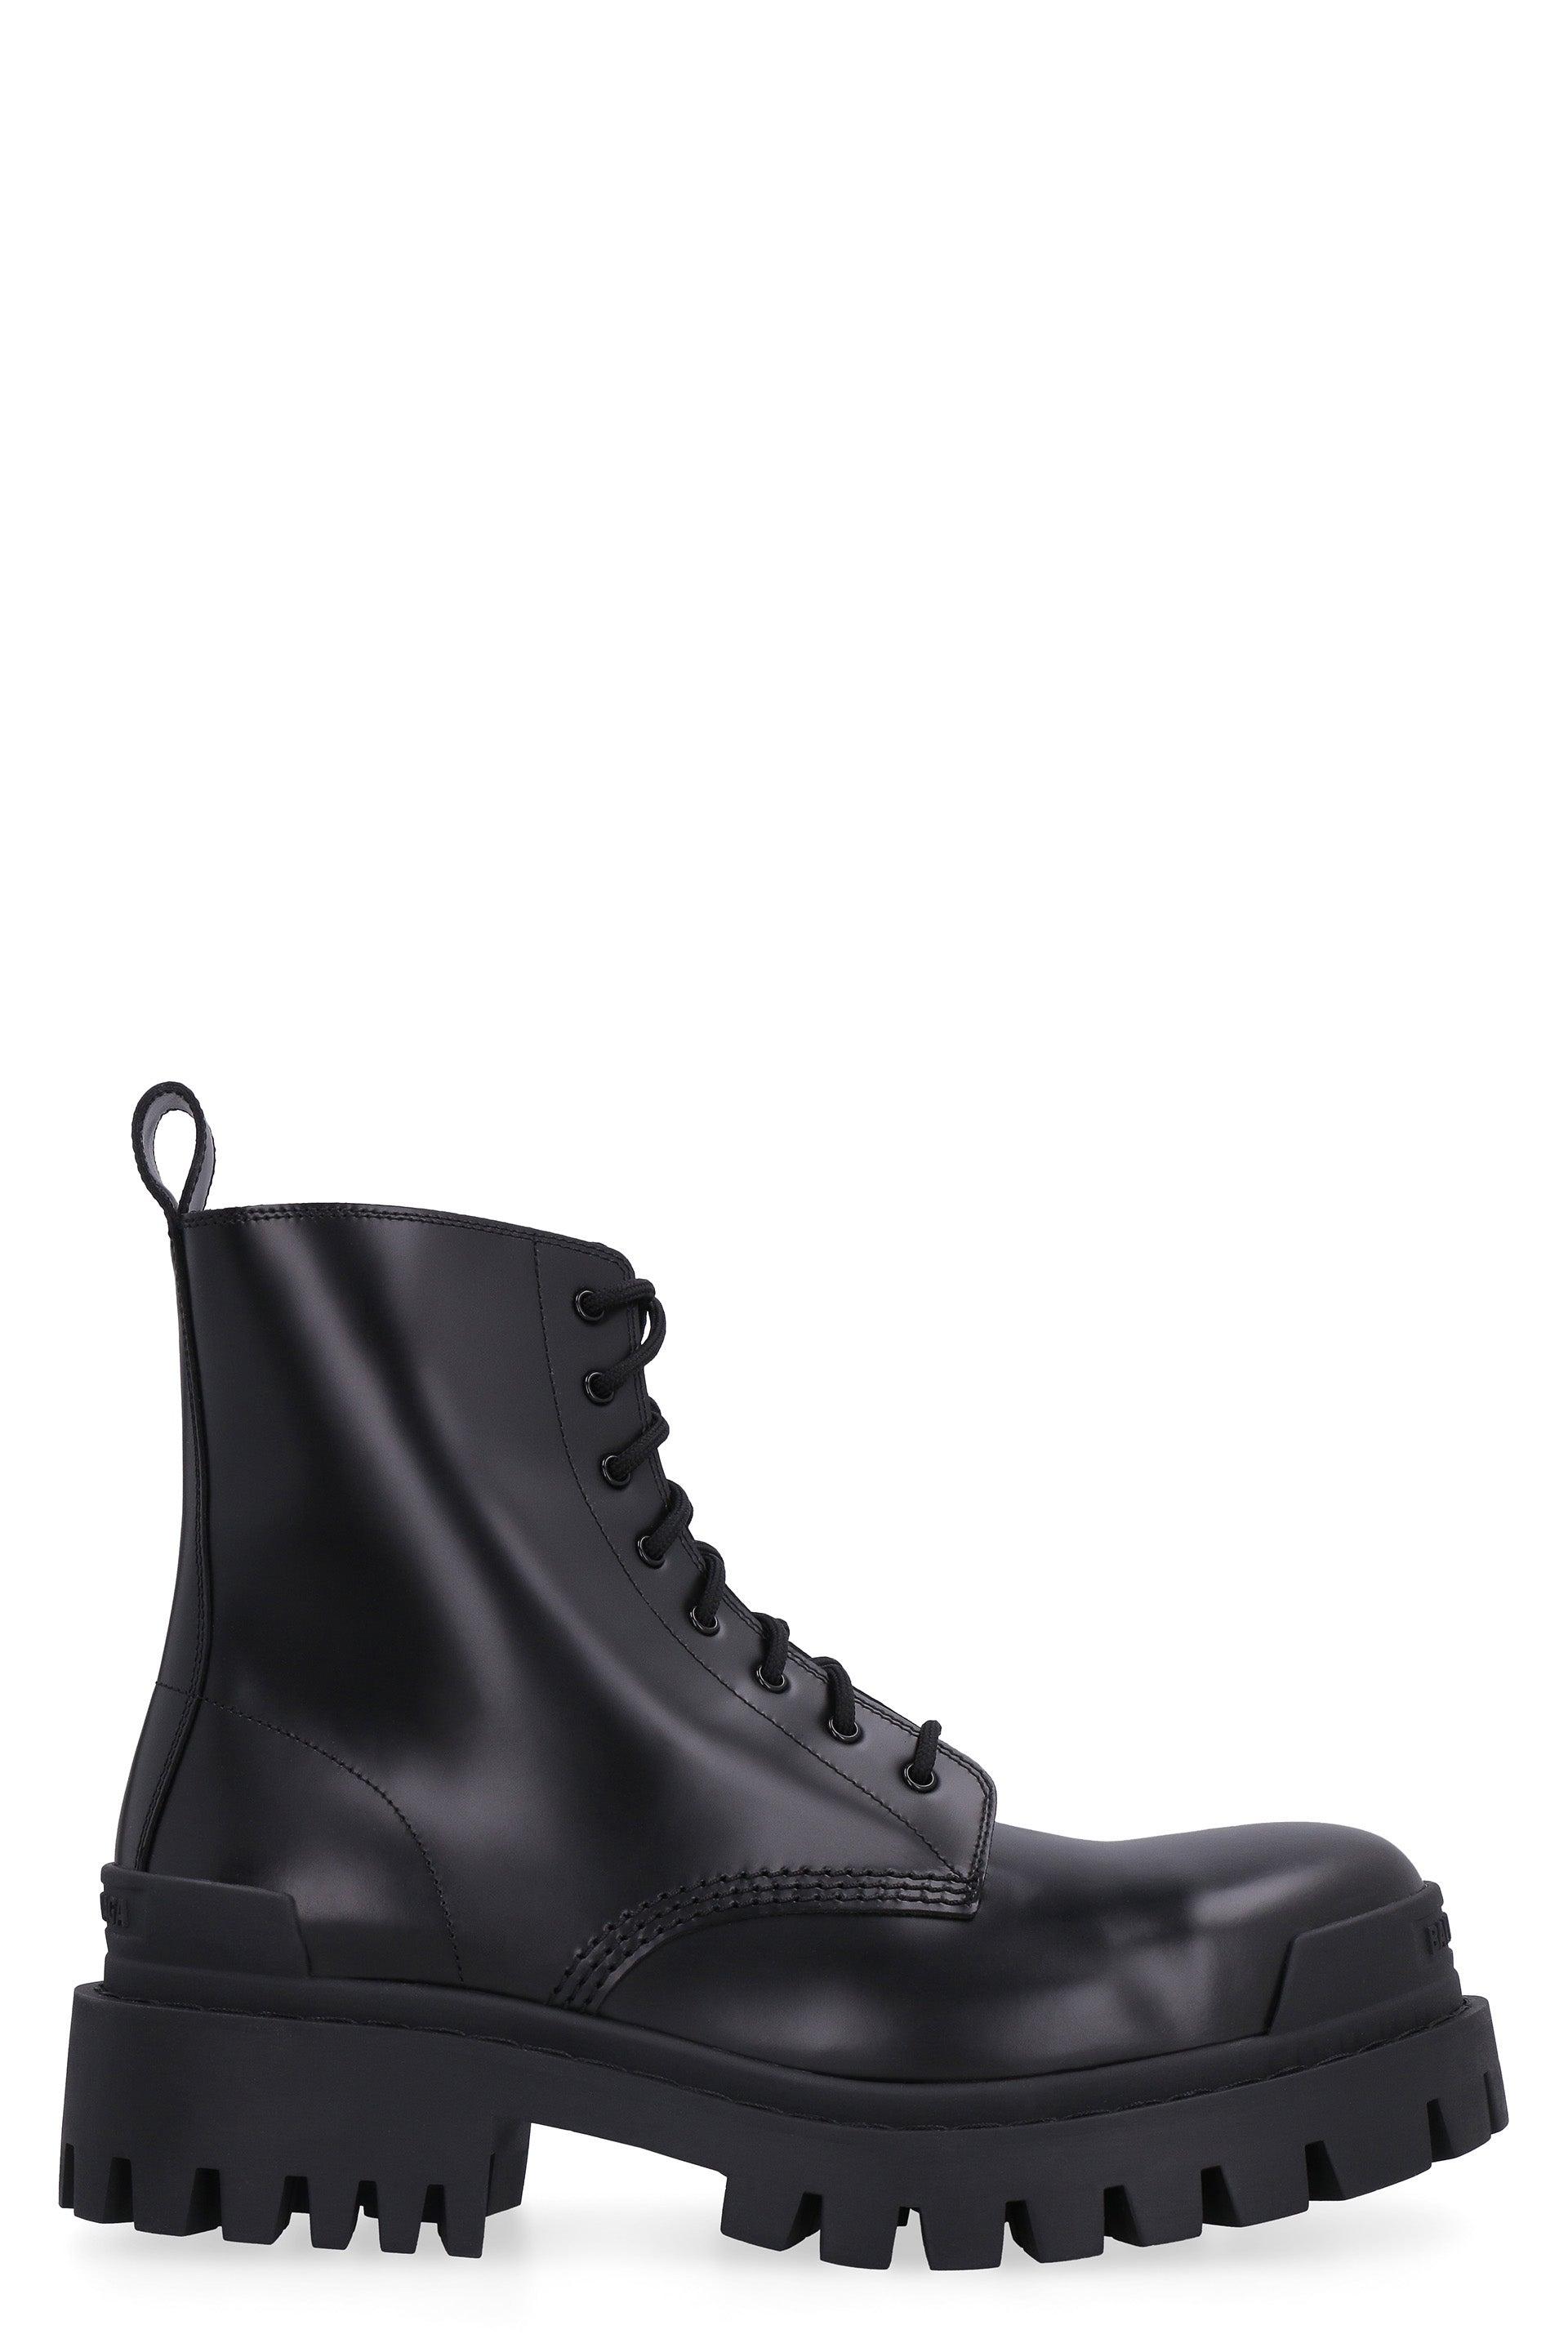 Balenciaga Strike Leather Combat Boots in Black | Lyst